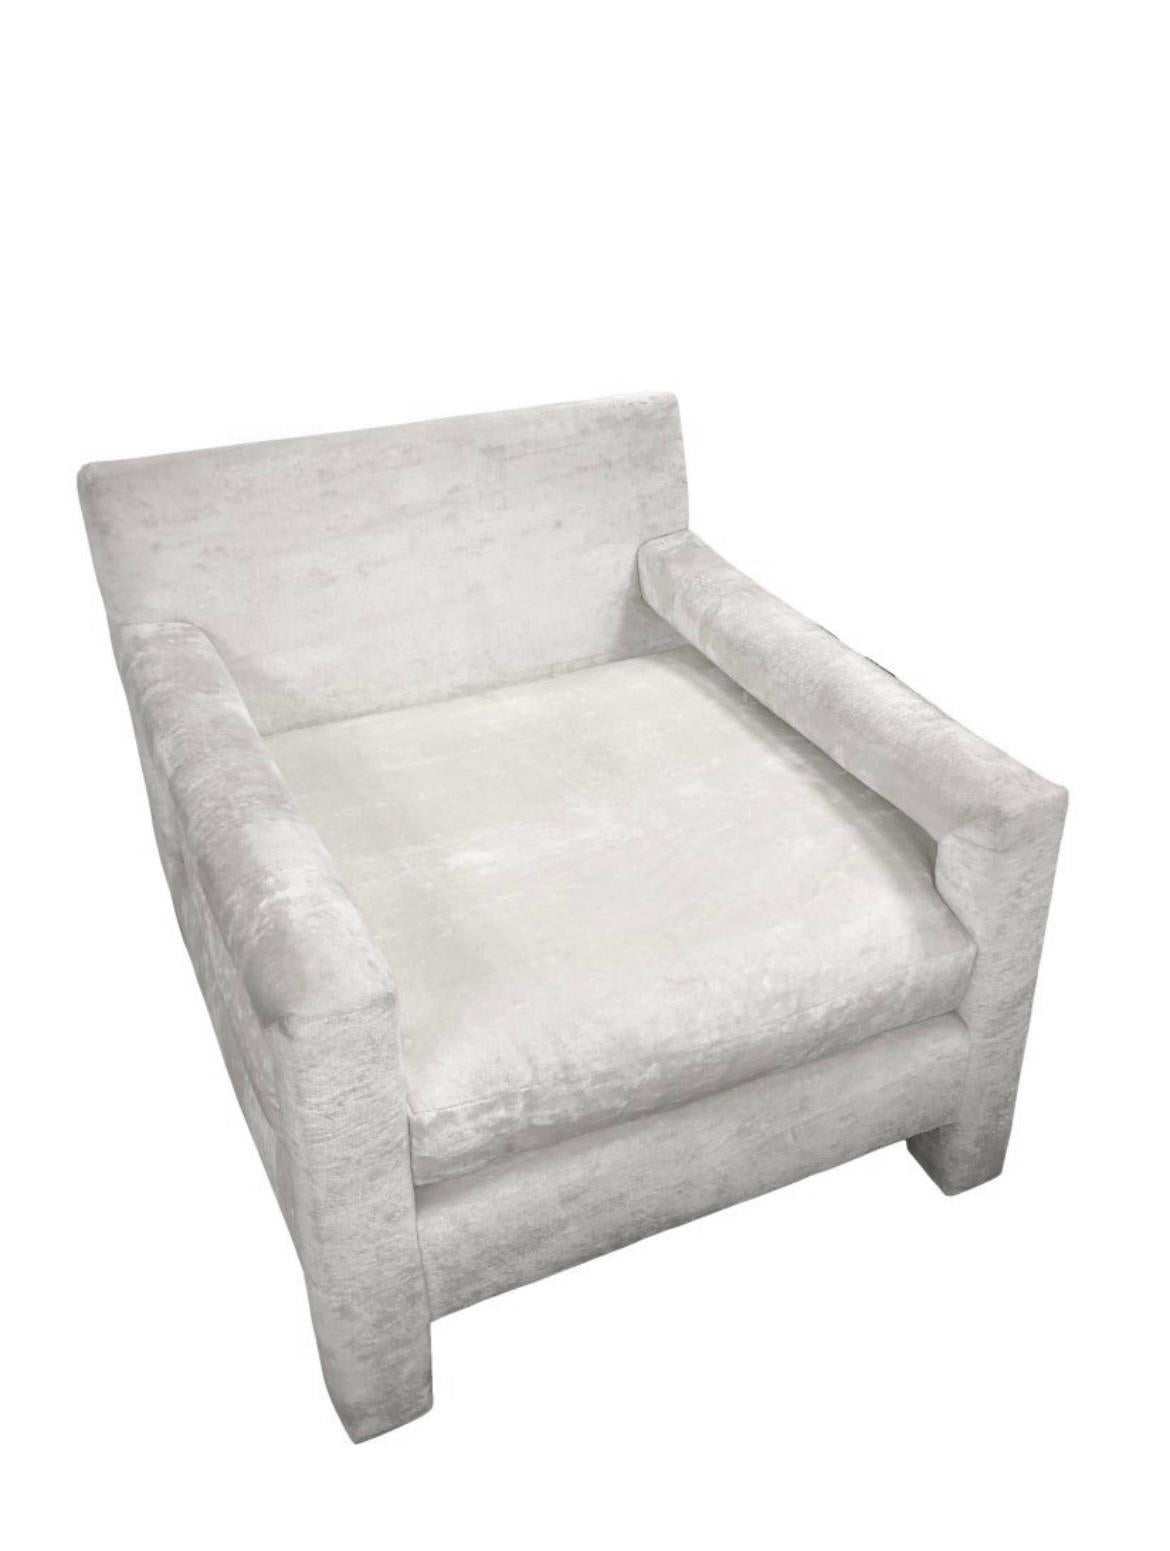 American Mid Century Milo Baughman Style Parson Chair Ottoman White Crushed velvet  For Sale